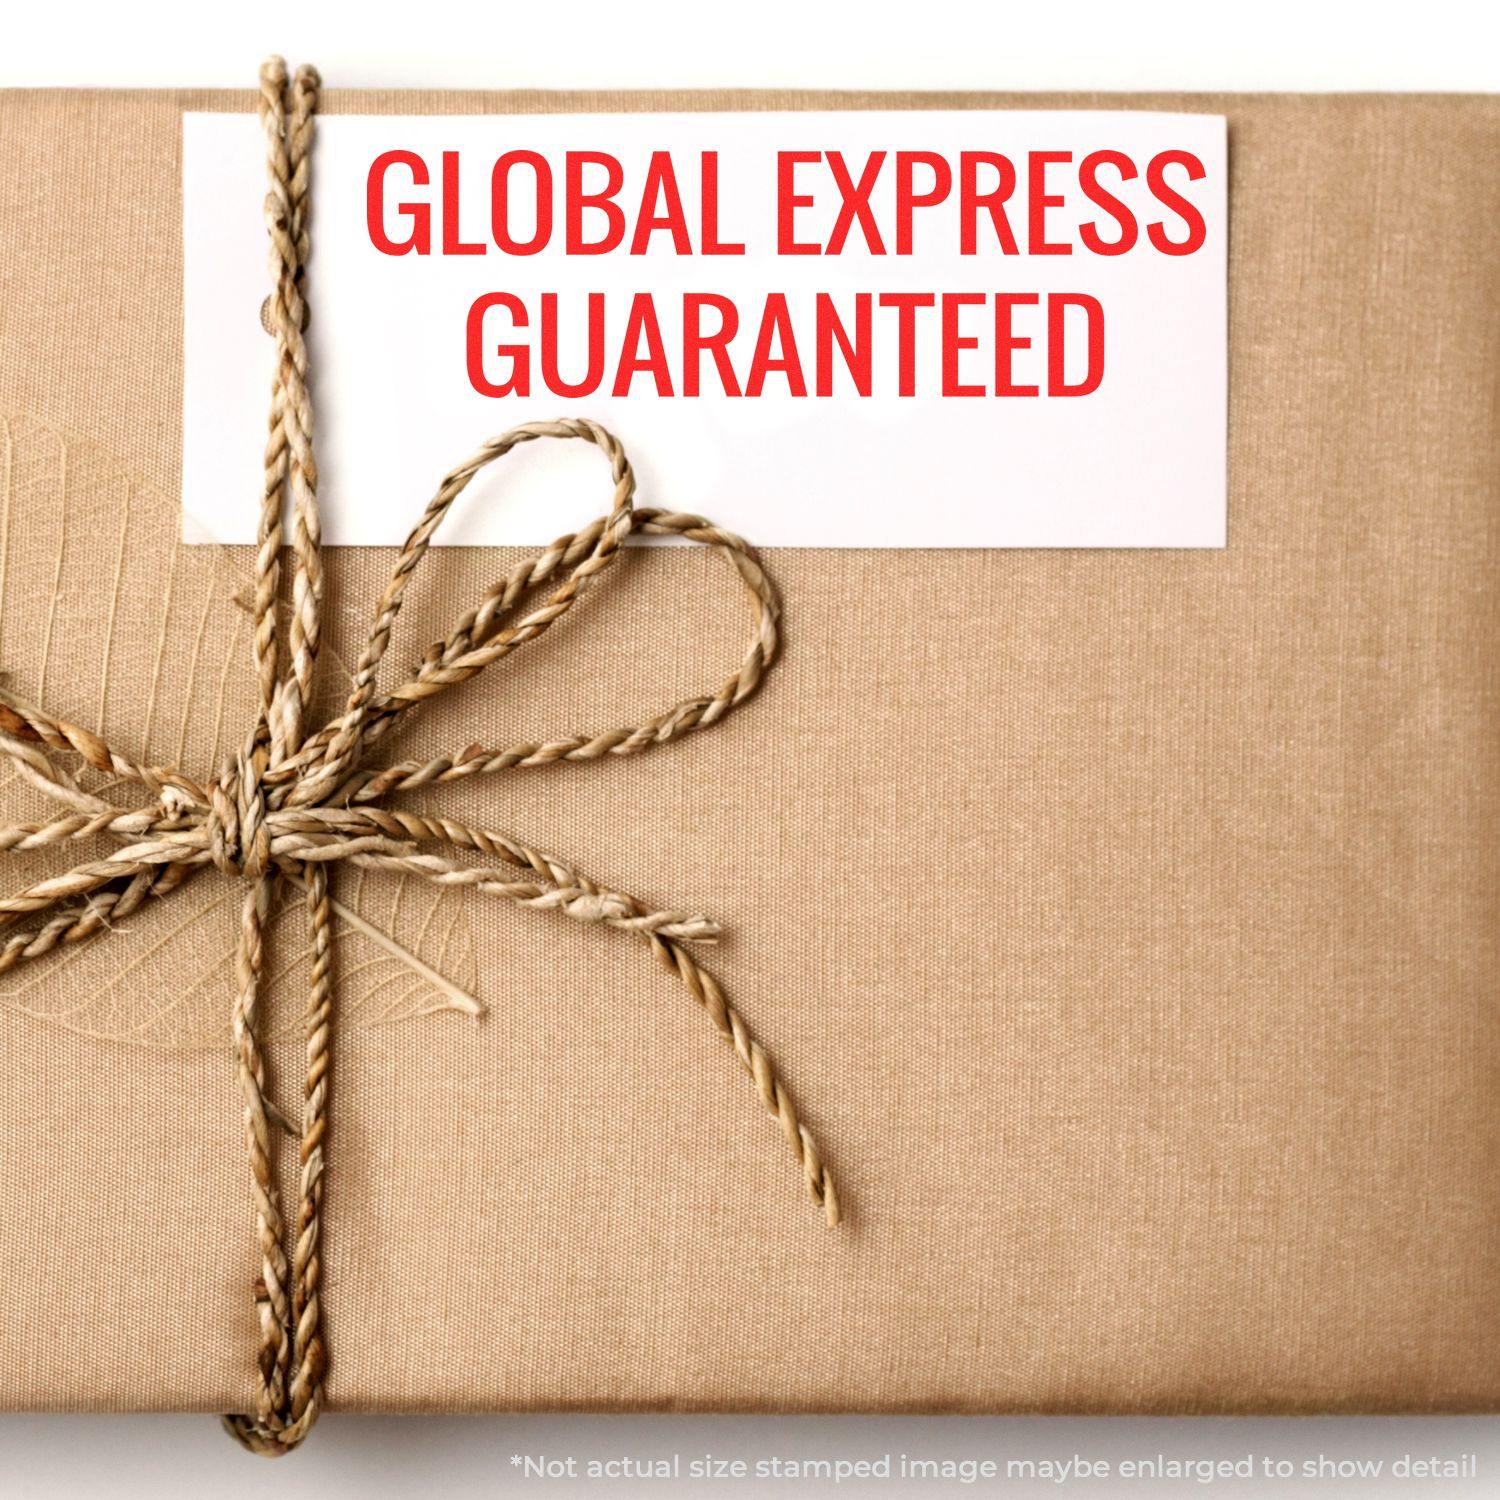 A self-inking stamp with a stamped image showing how the text "GLOBAL EXPRESS GUARANTEED" is displayed after stamping.